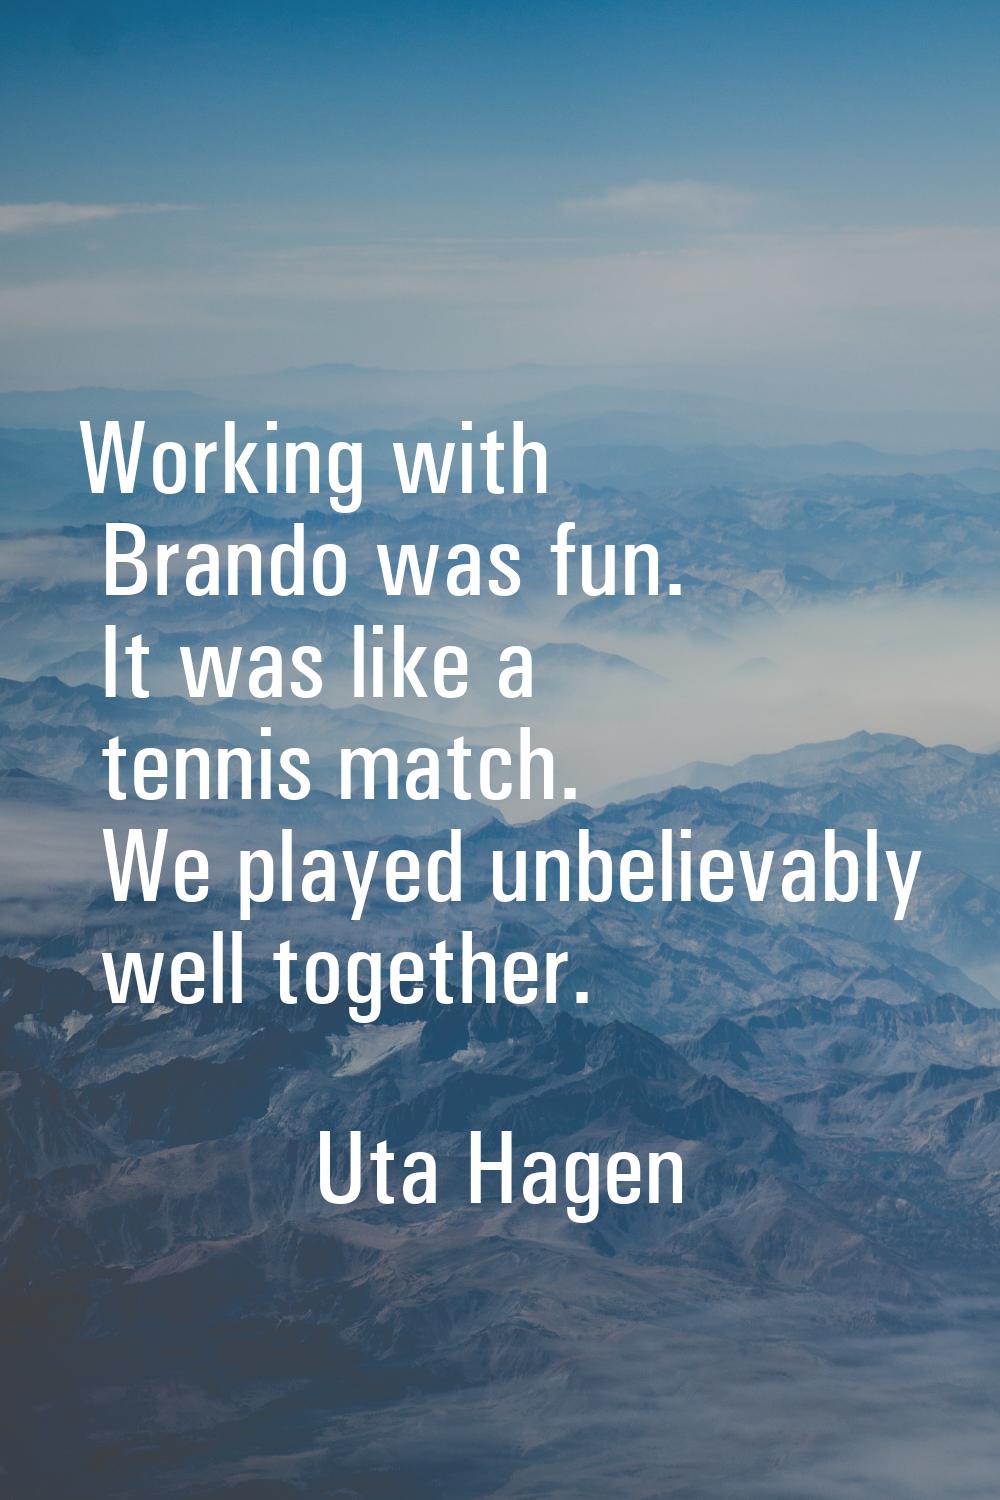 Working with Brando was fun. It was like a tennis match. We played unbelievably well together.